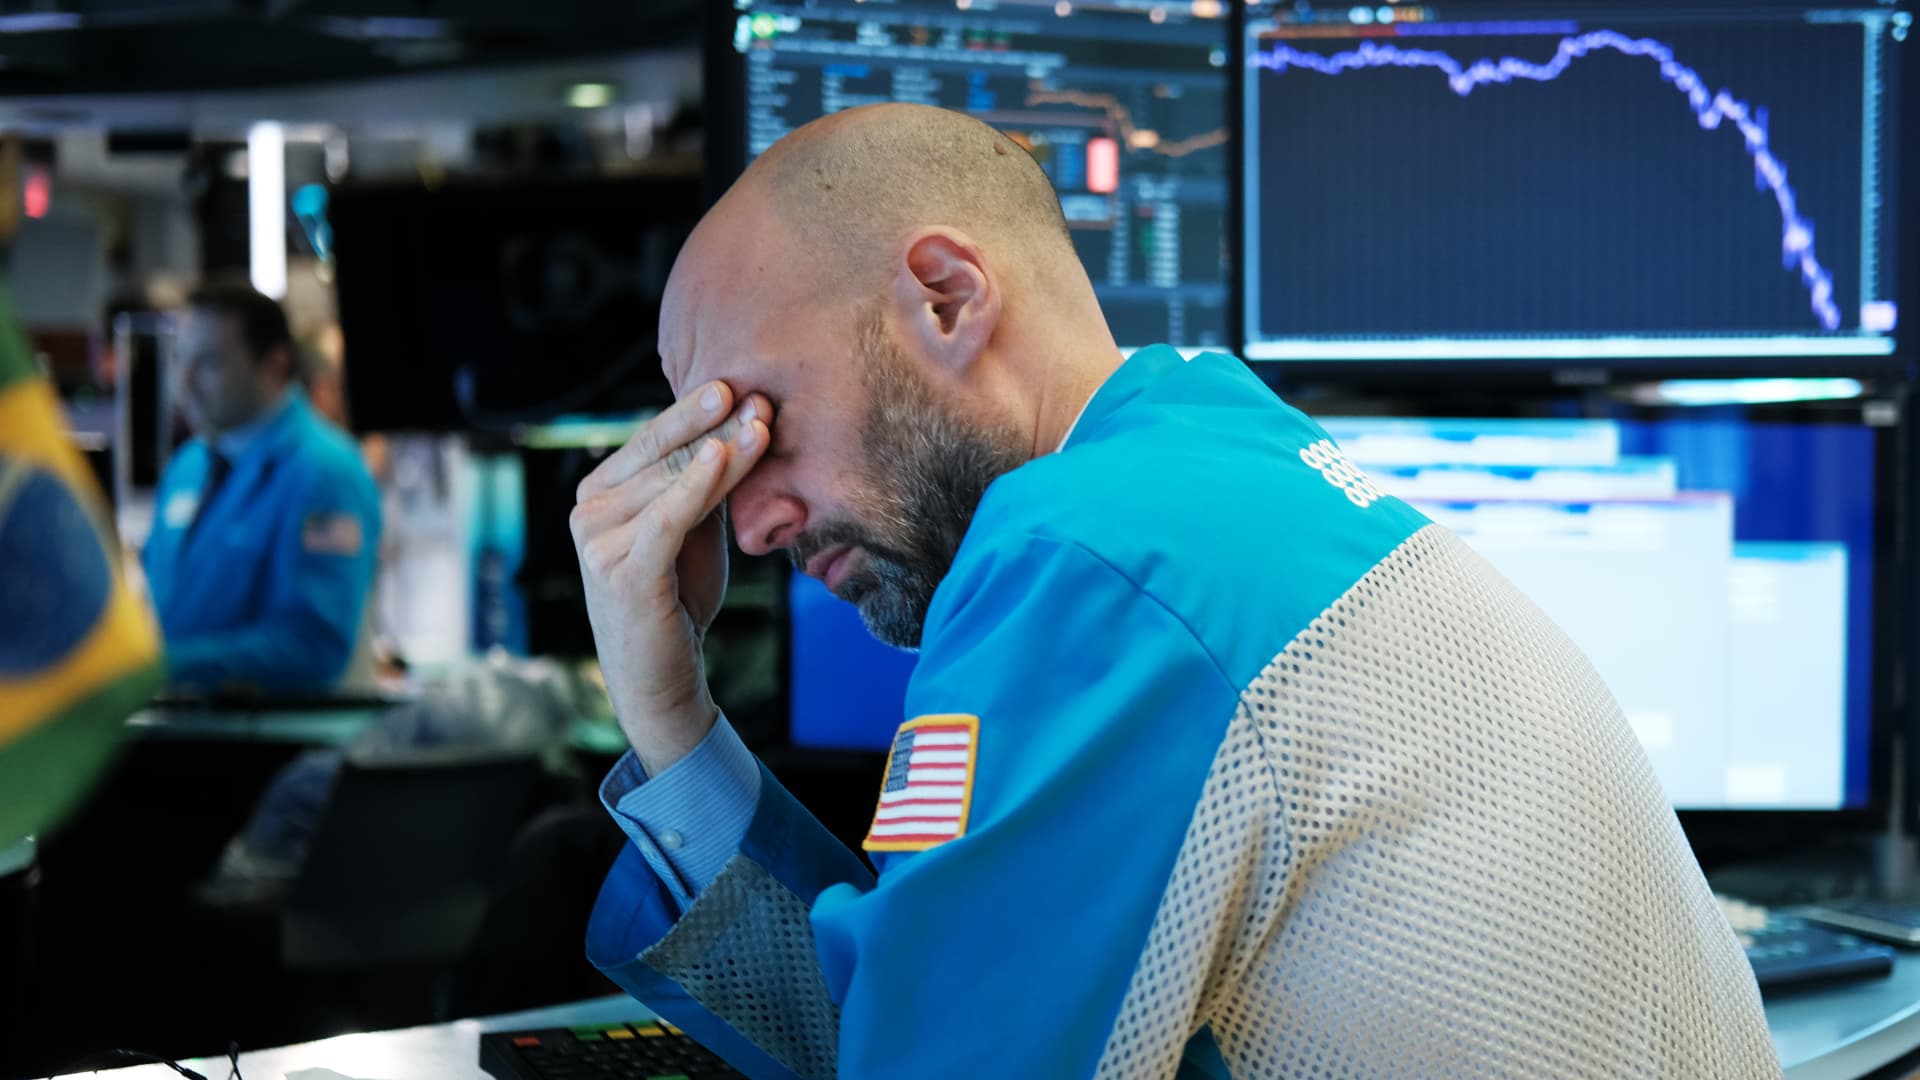 Fund manager names 3 recession-proof stocks and reveals how to rescue portfolio